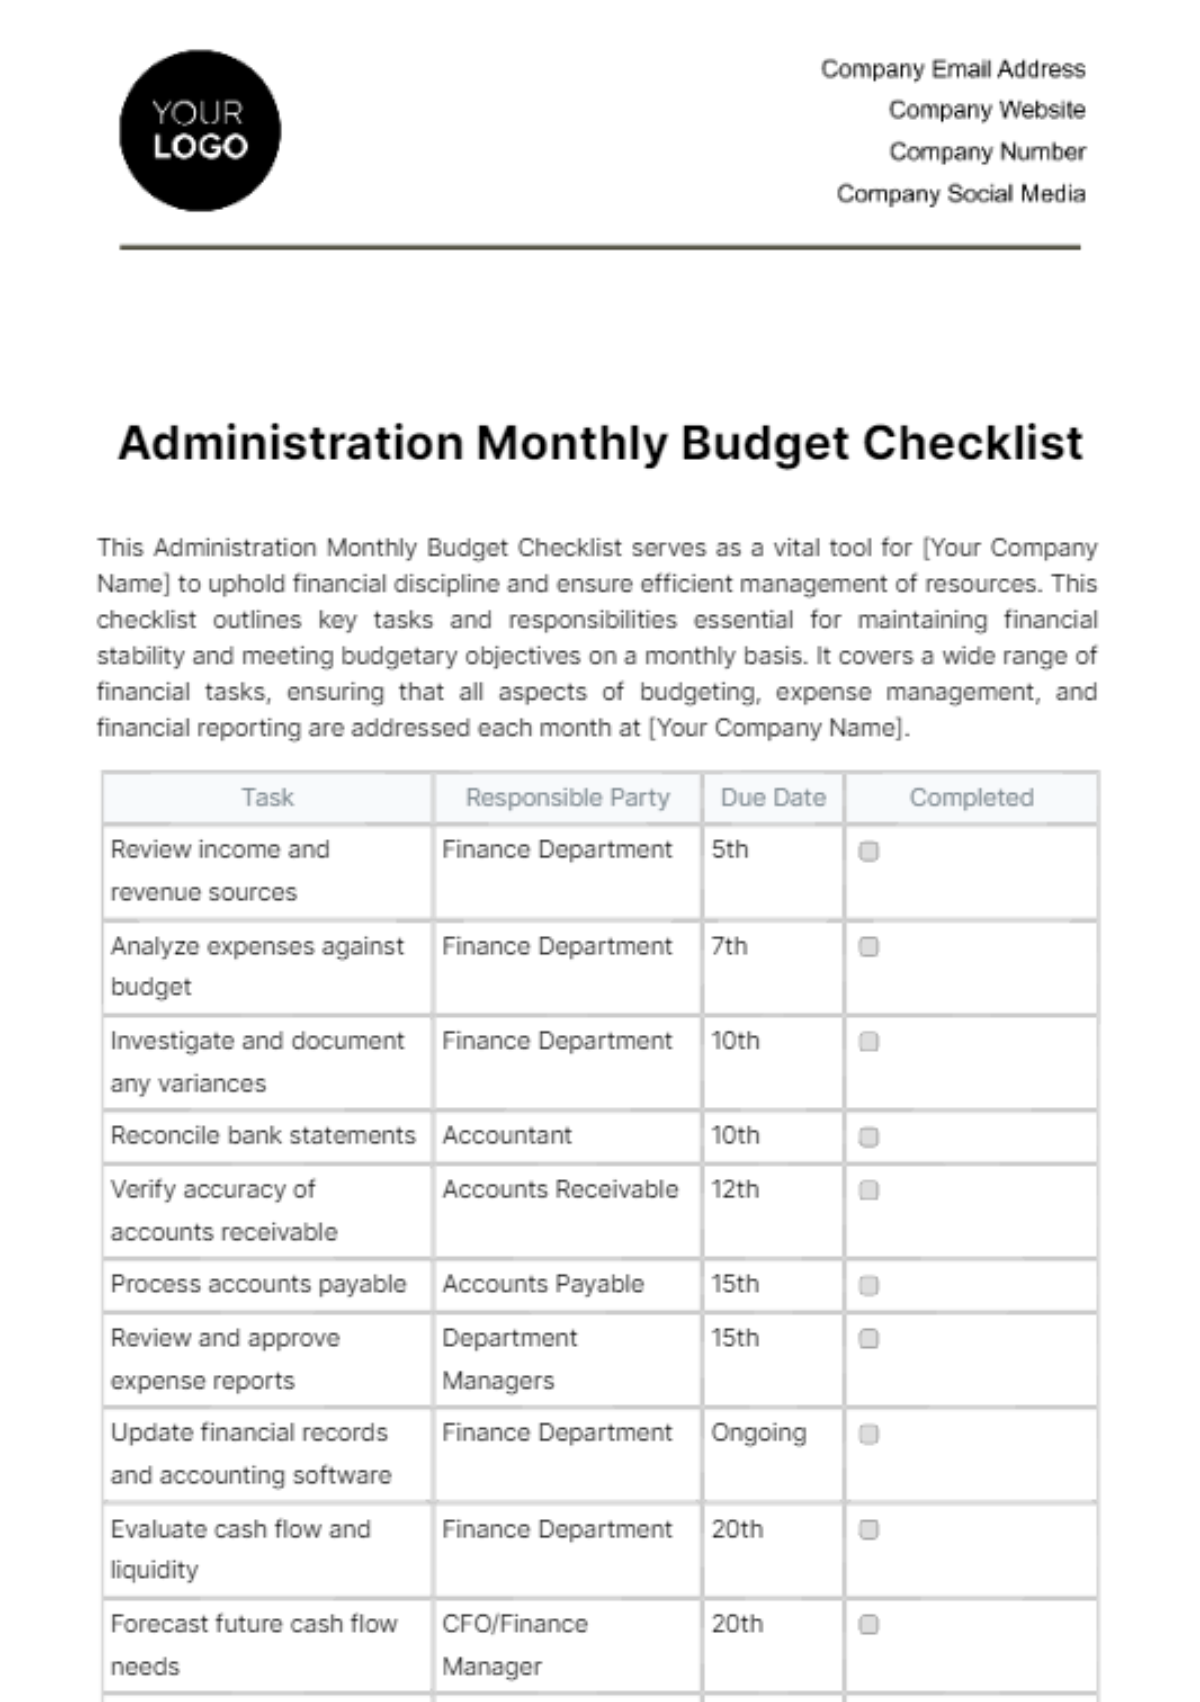 Administration Monthly Budget Checklist Template